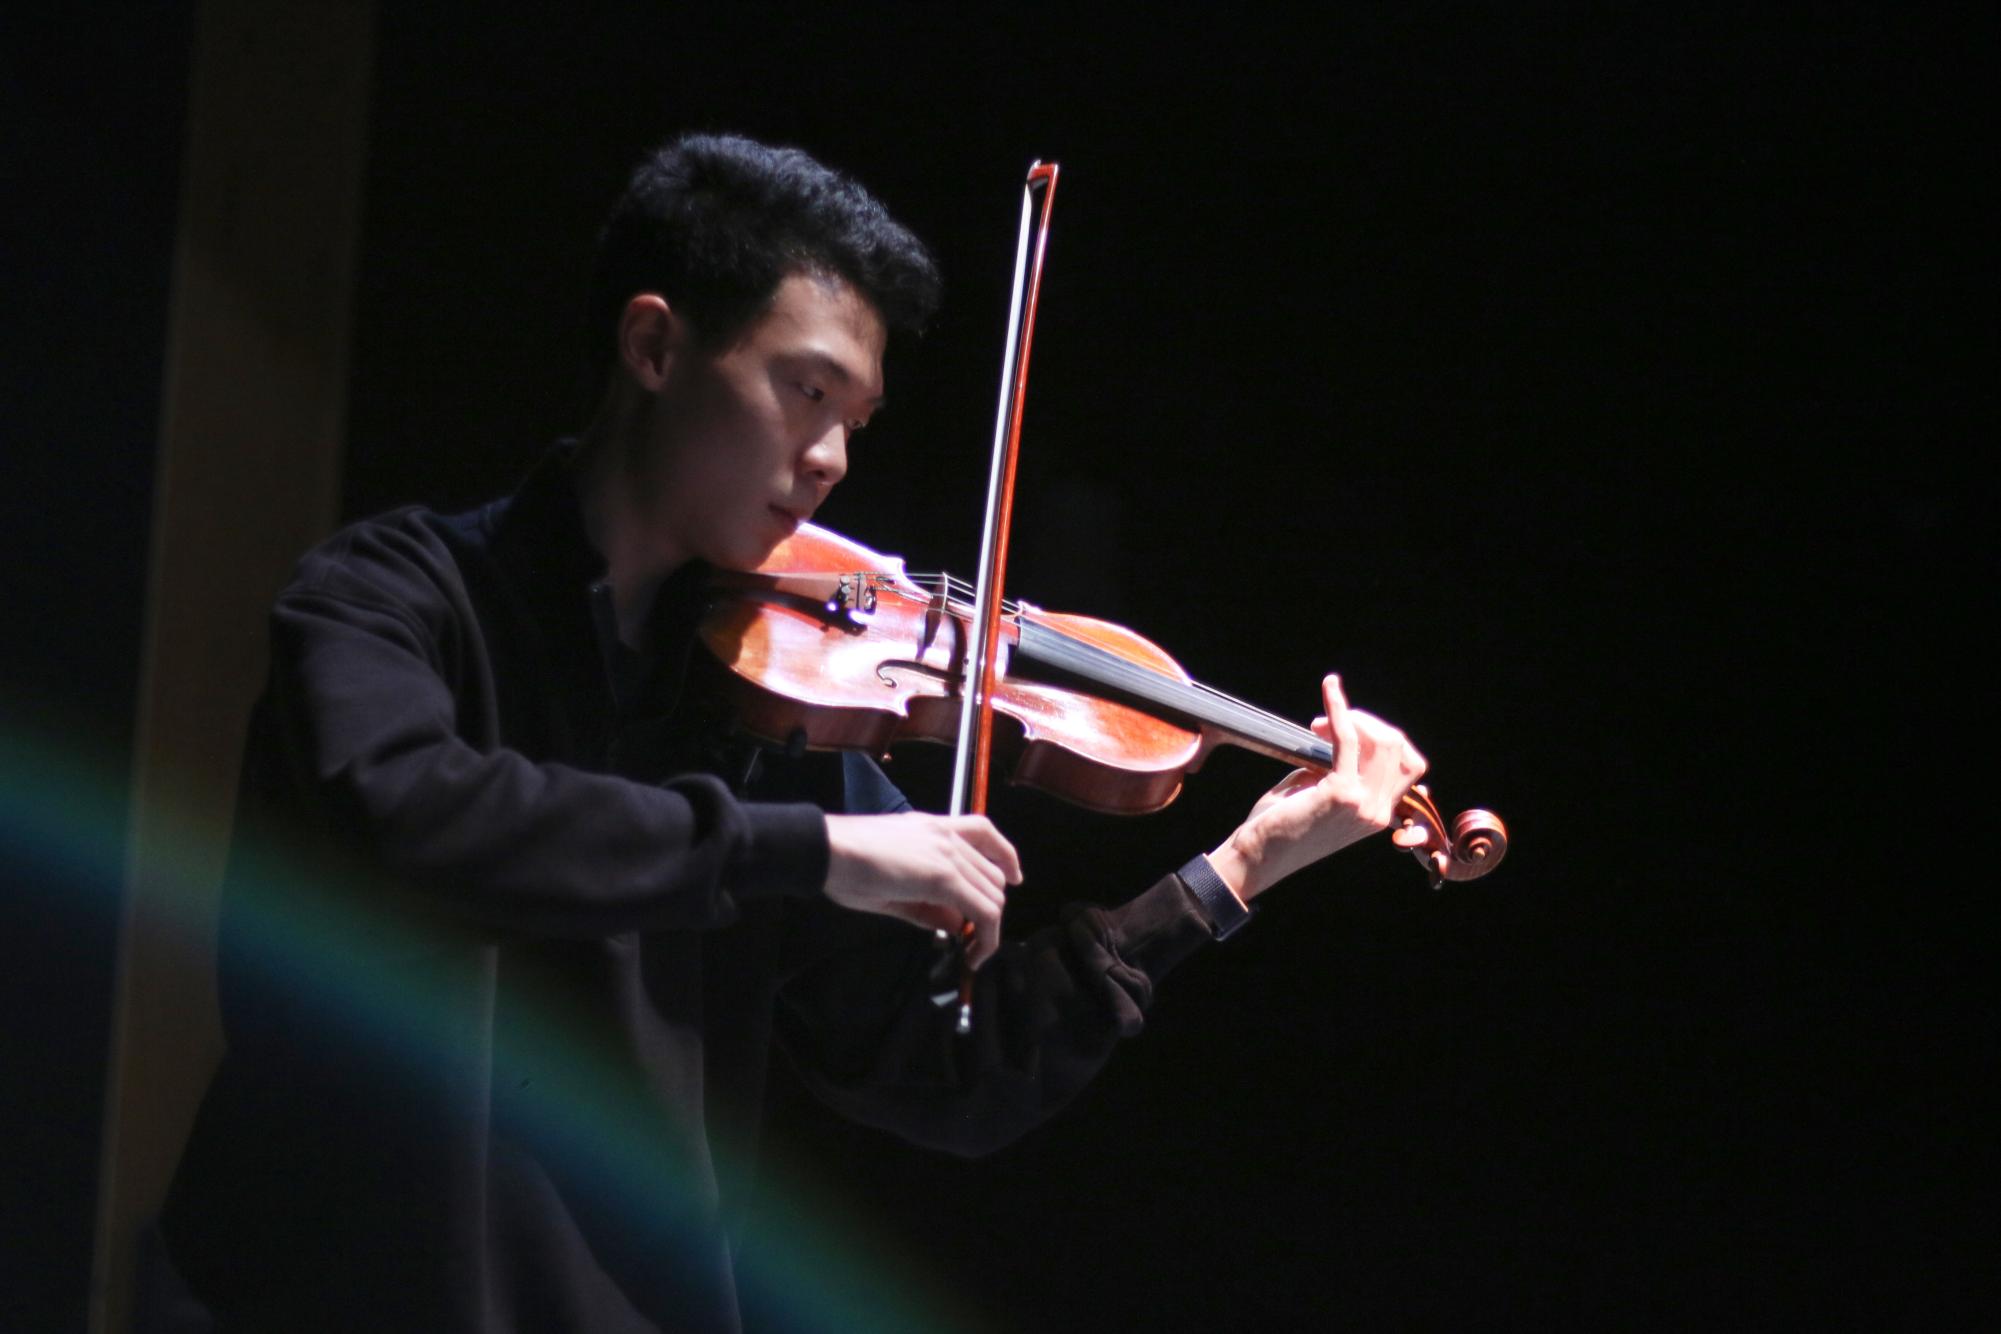 Junior Adam Ye performs the violin in the Performing Arts Center. He has practiced and performed in many orchestras, including the St. Louis Symphony Youth Orchestra, Community Music School’s Preparatory Program, and the Missouri All-State Orchestra. Through his numerous performances, Ye has found an outlet for self expression through the violin. “The instrument shouldnt be a prison,” Ye said. “It should be a key, a tool for you to explore yourself.”